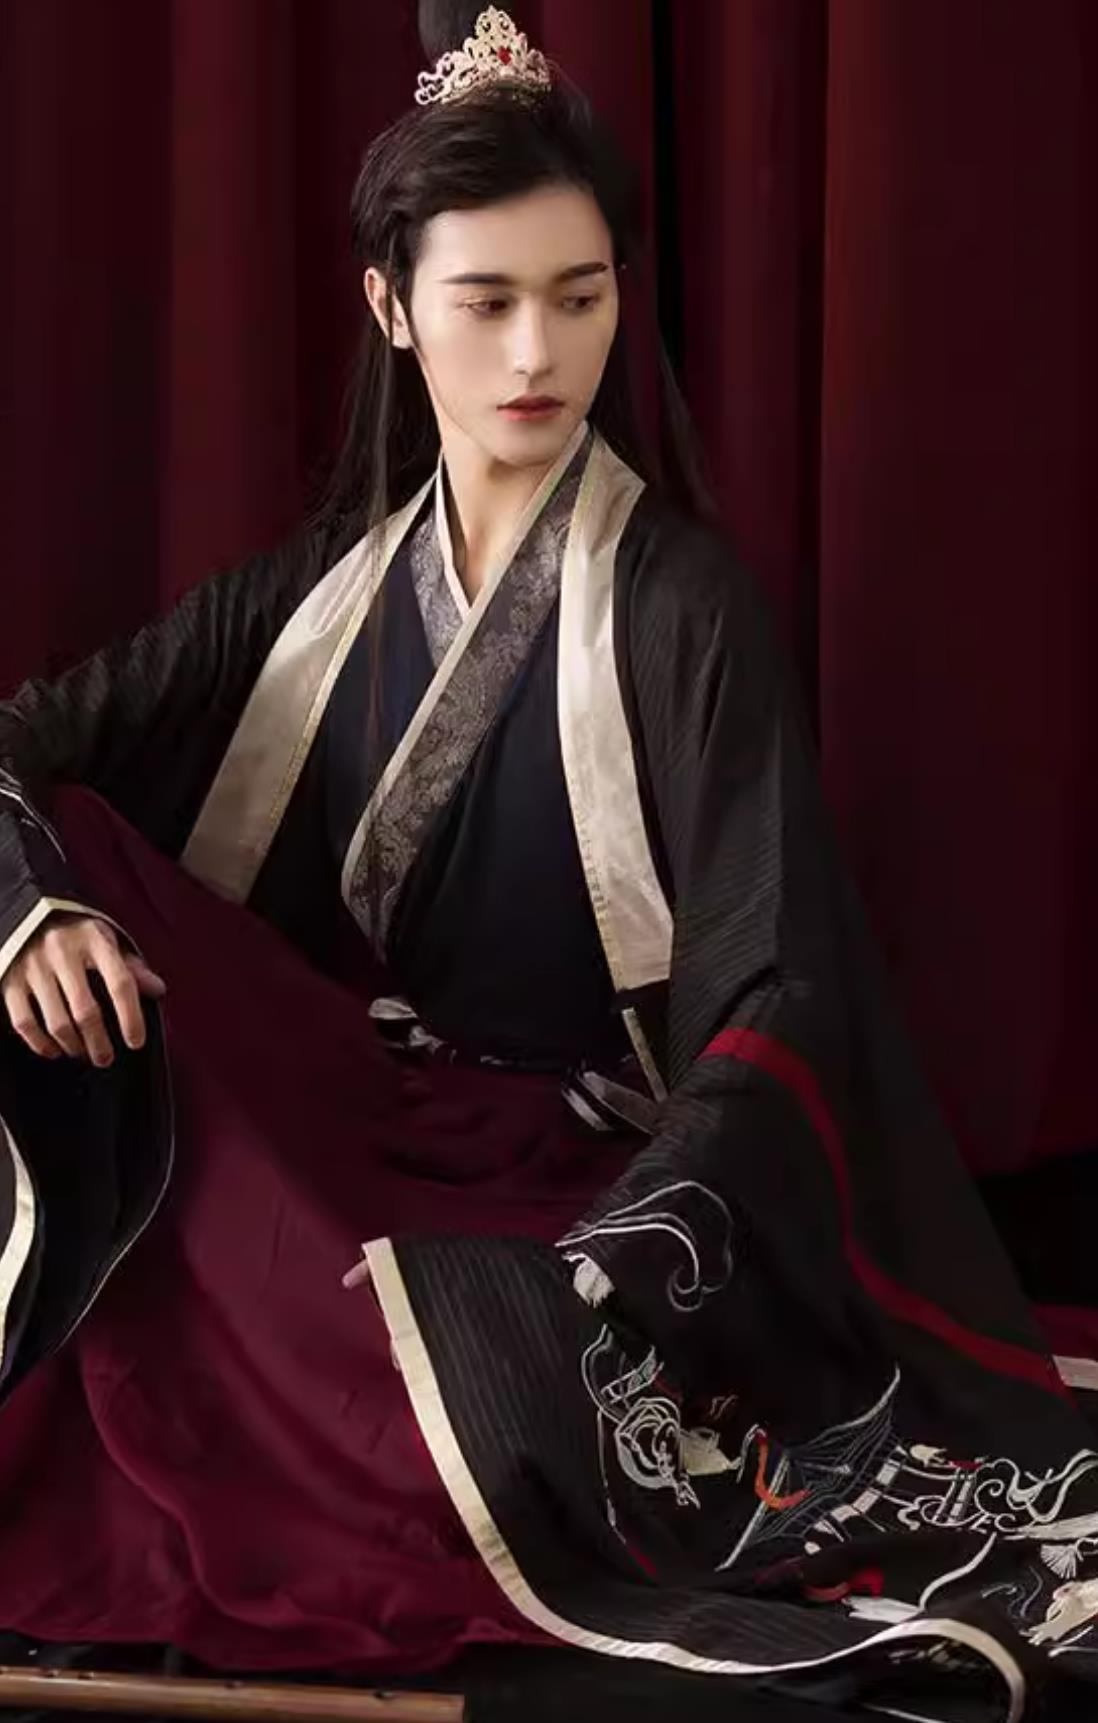 China Travel Photography Jin Dynasty Hero Costume The Untamed Wei Wuxian Traditional Hanfu Ancient China Wuxia Swordsman Clothing